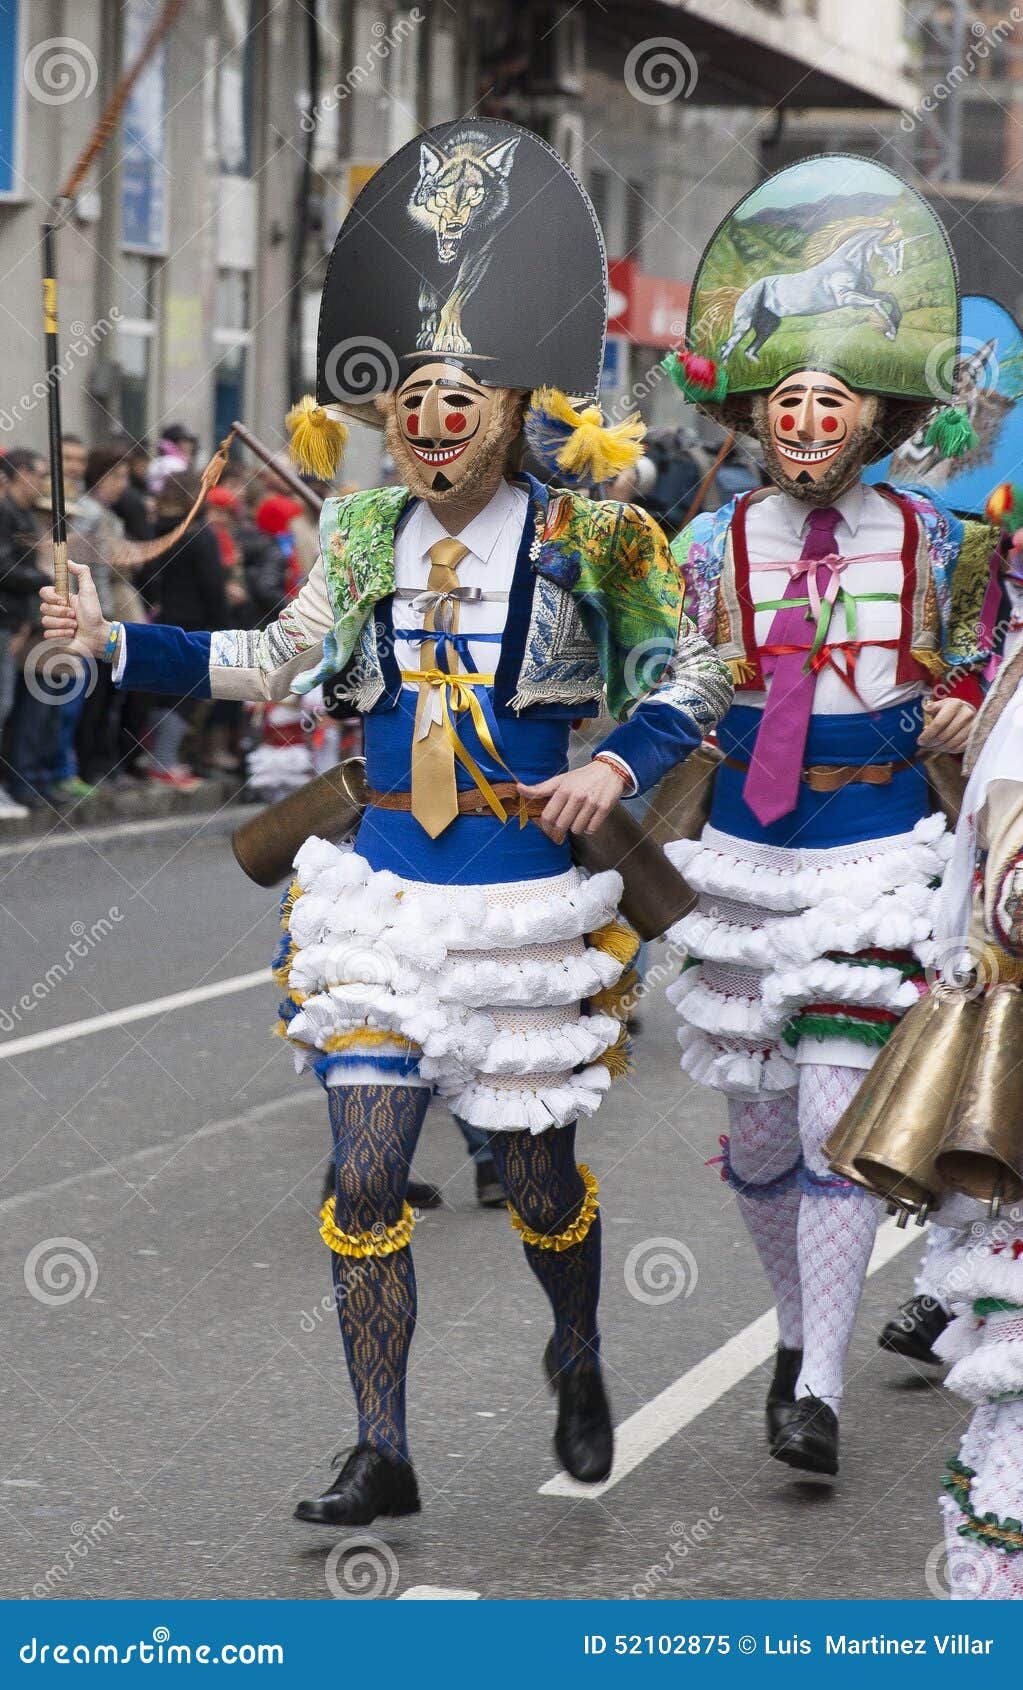 Why Are Masks Worn at Carnival in Spain?